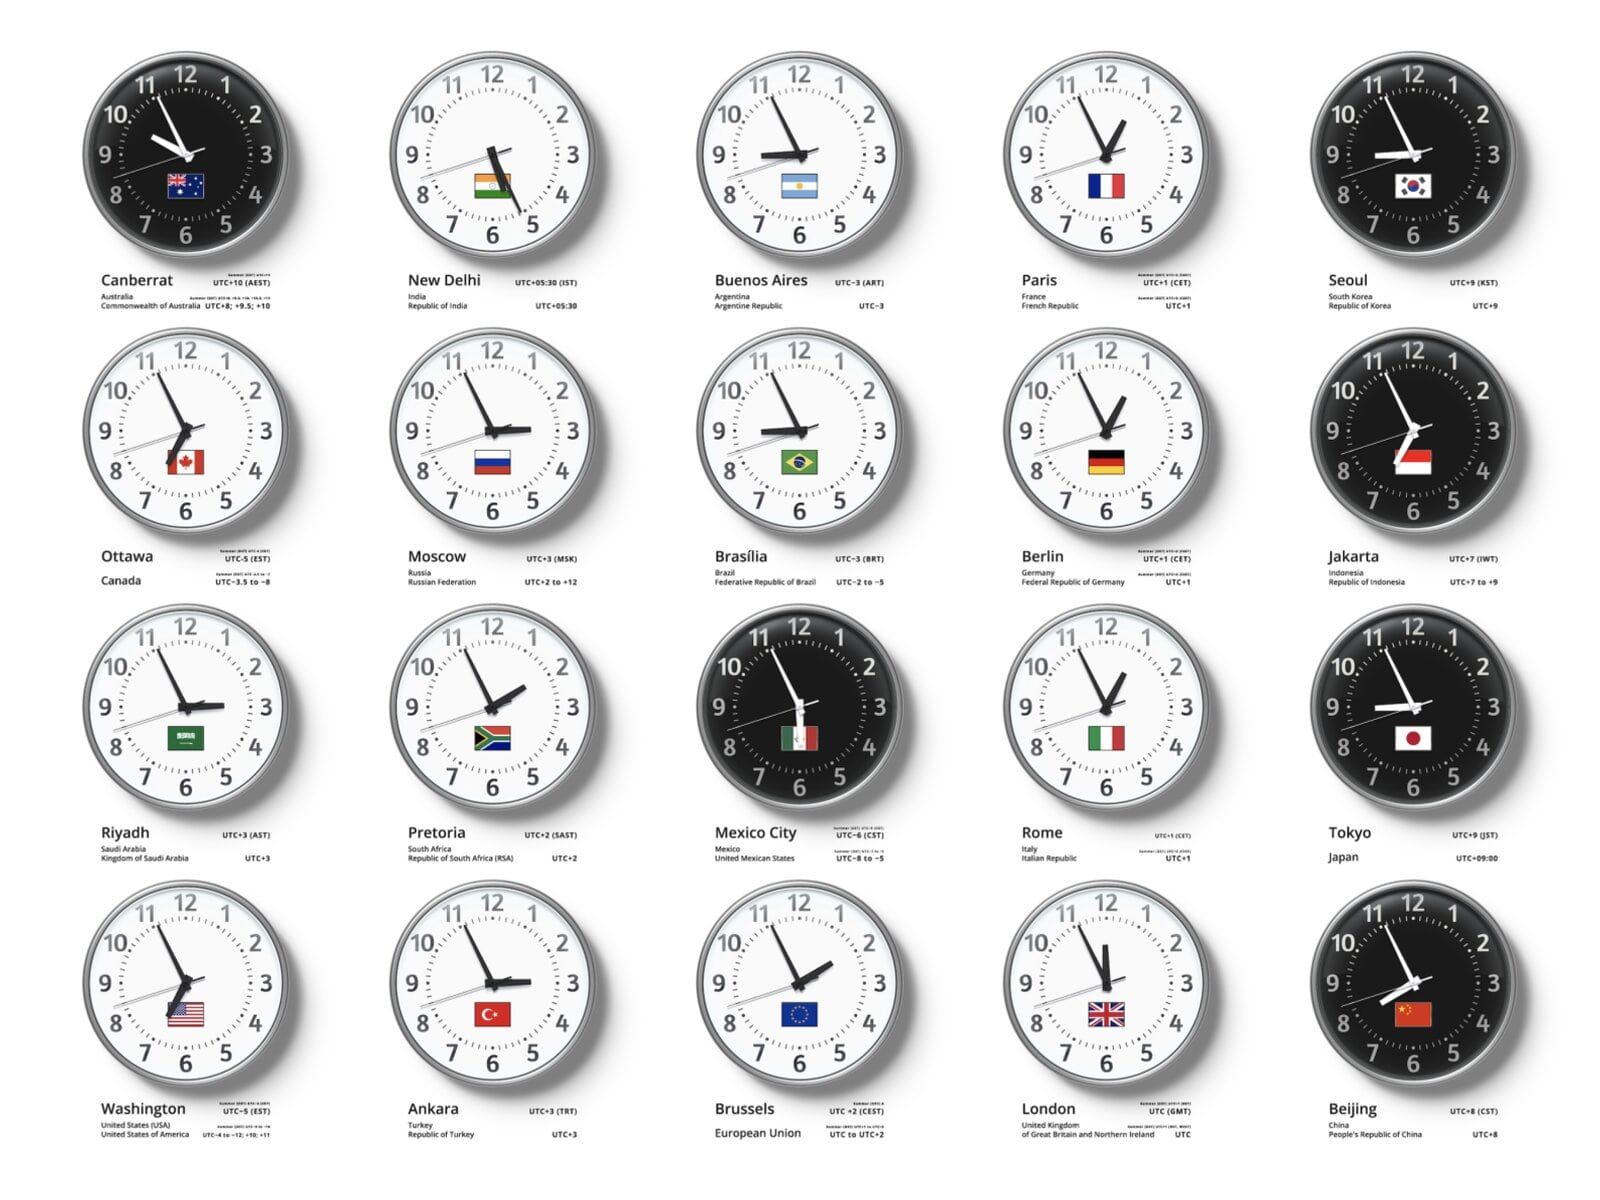 Remote team management throughout different time zones makes you pay closer attention to your team members’ schedules (*image by [Chaim Devine](https://dribbble.com/i43){ rel="nofollow" target="_blank" .default-md}*)